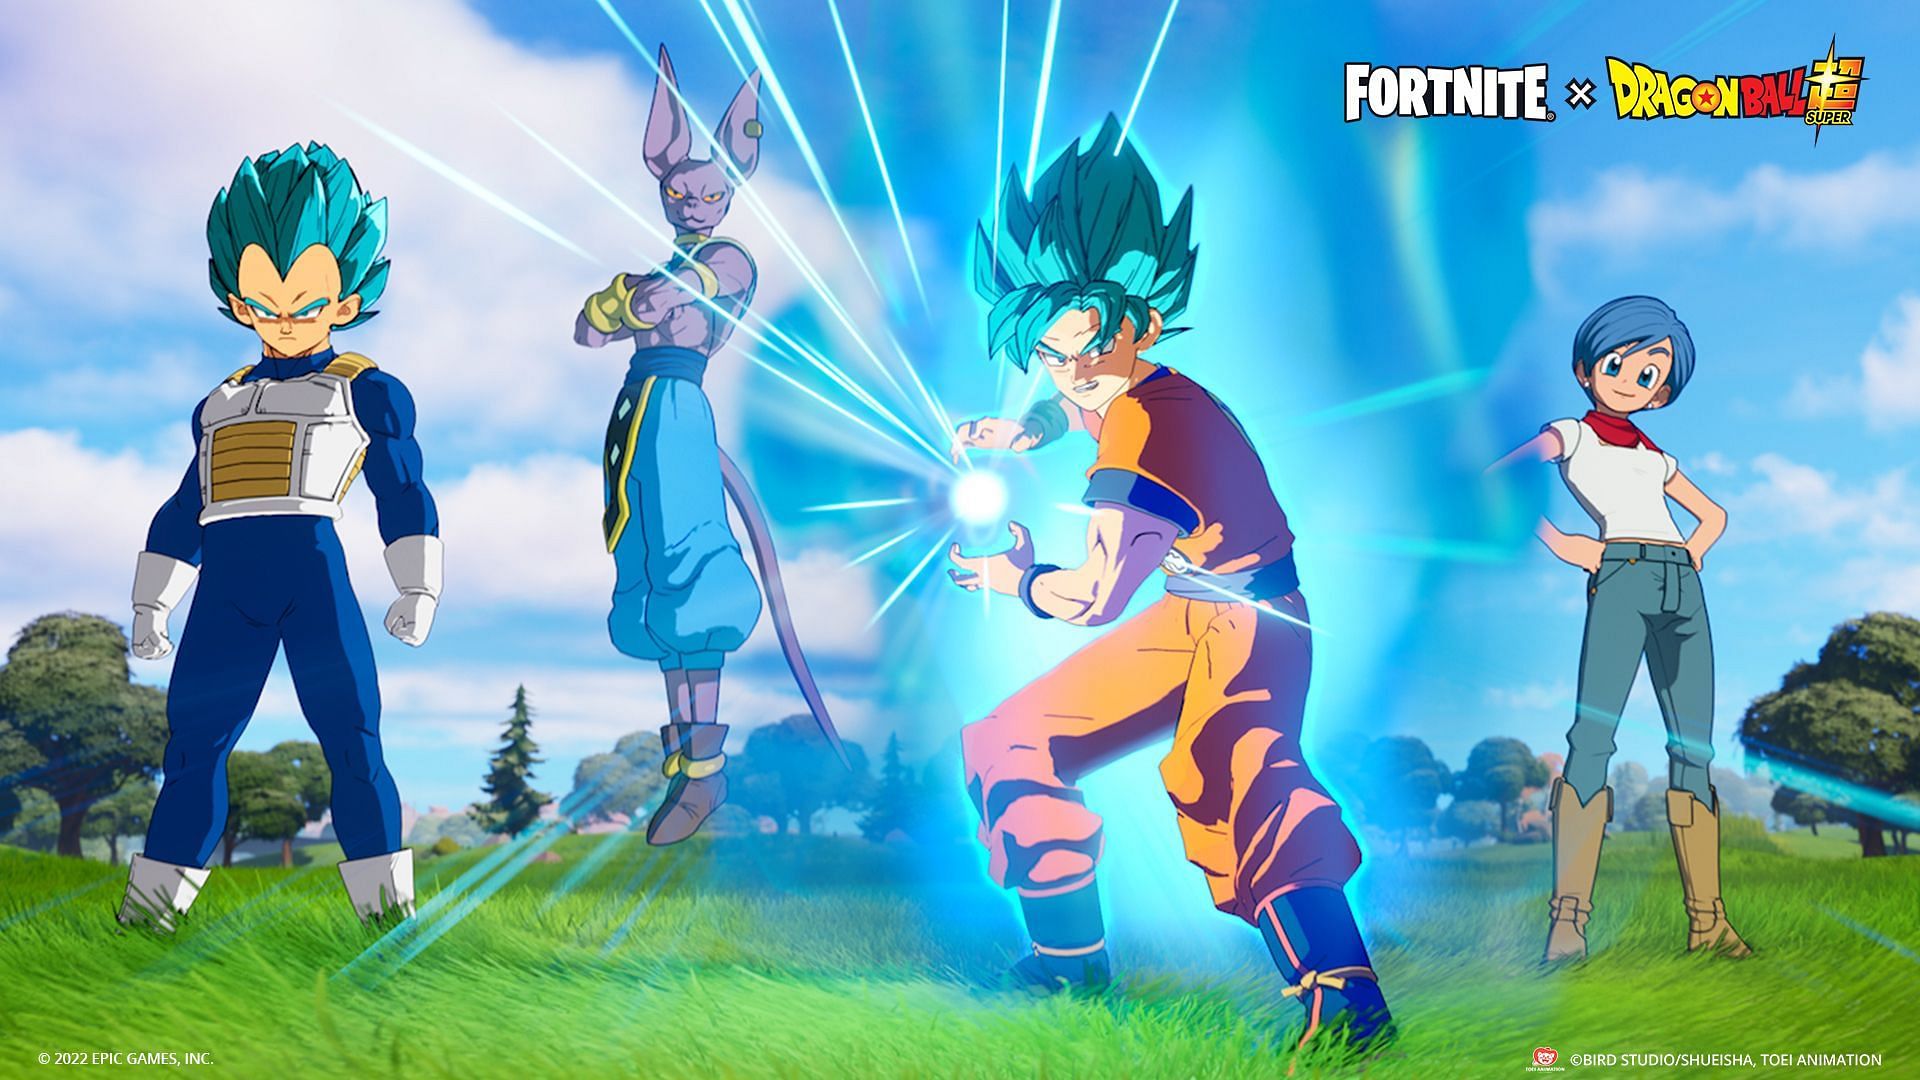 Fortnite x Dragon Ball collab is coming to an end (Image via Epic Games)